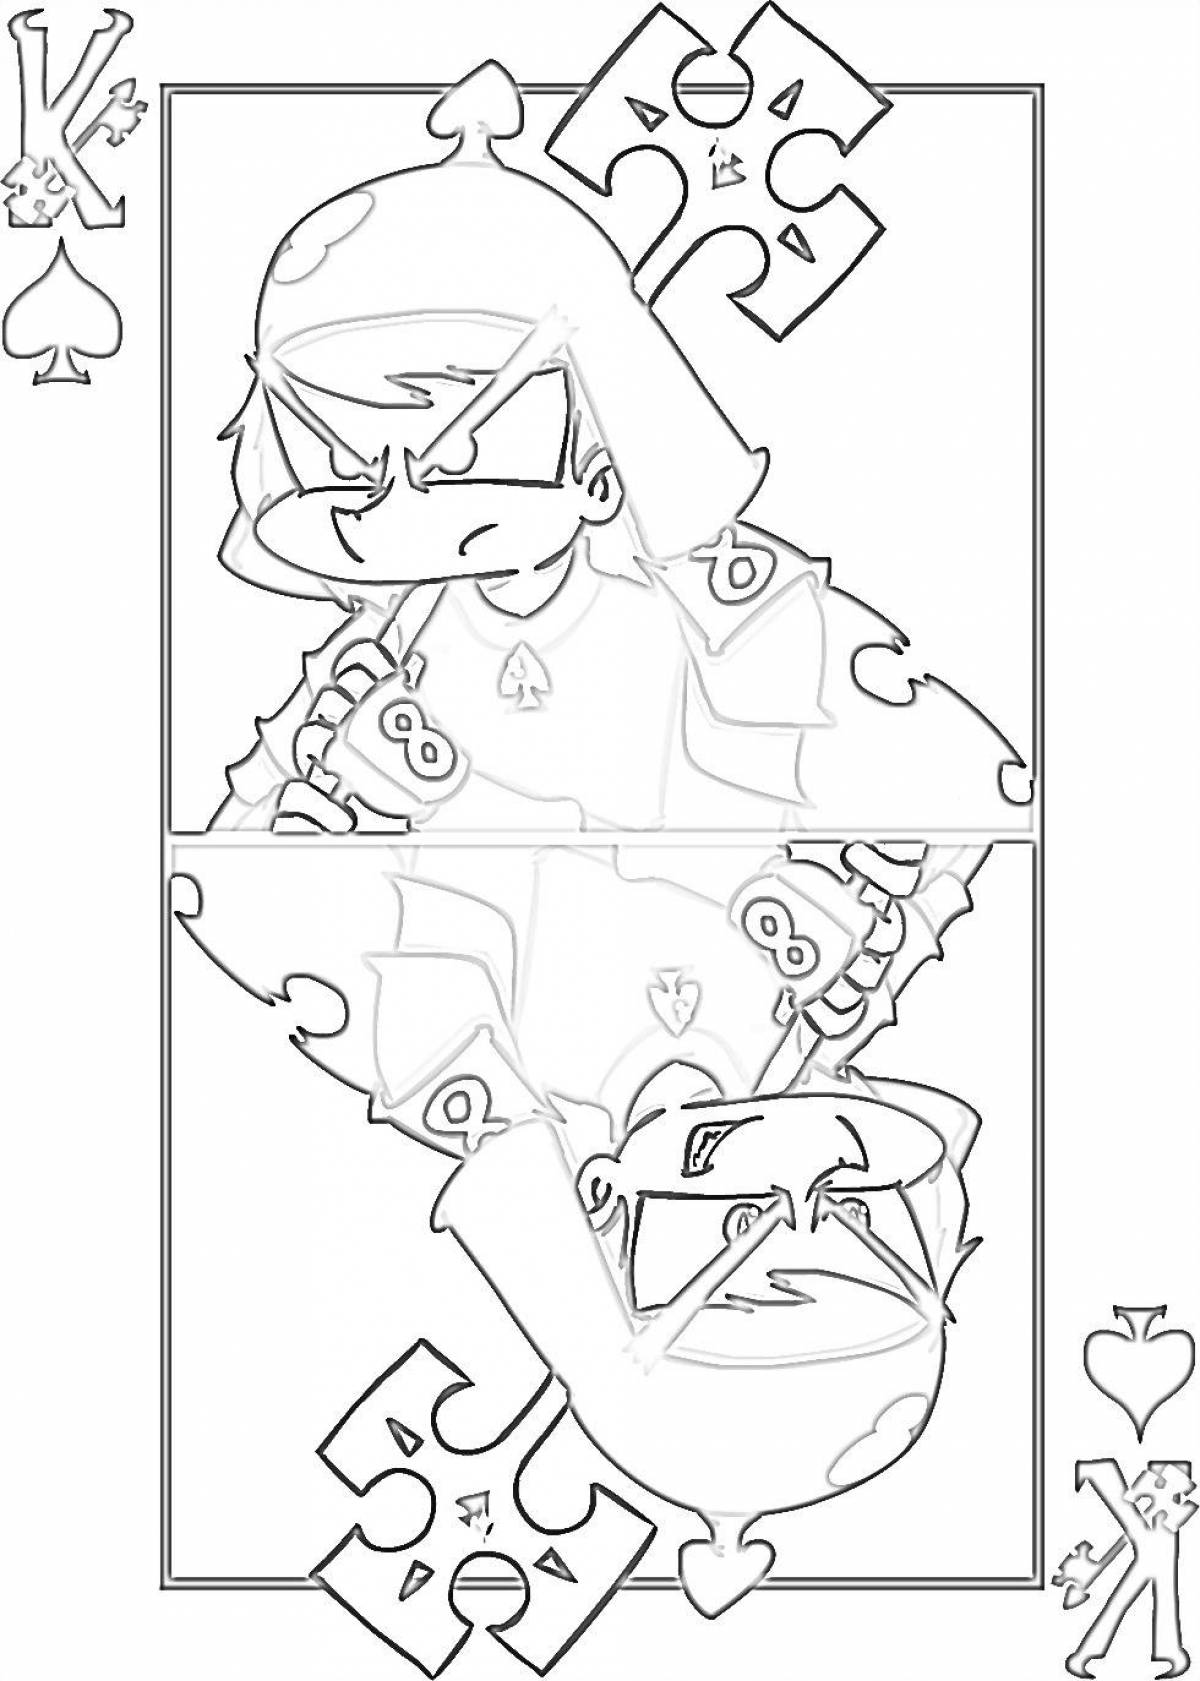 Adventure coloring book 13 cards